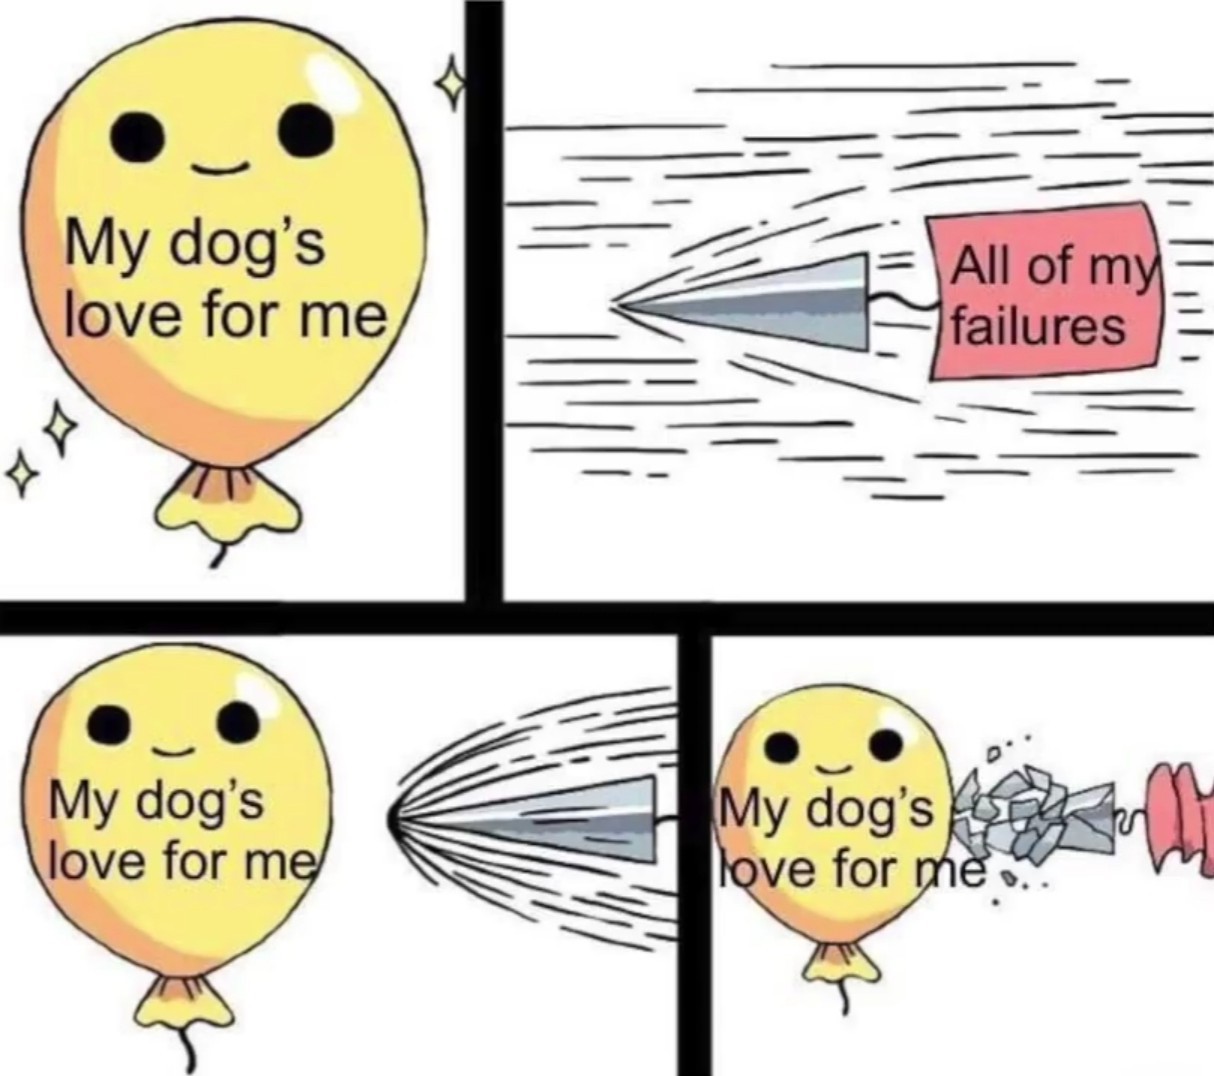 Dogs are so pure and innocent. - meme